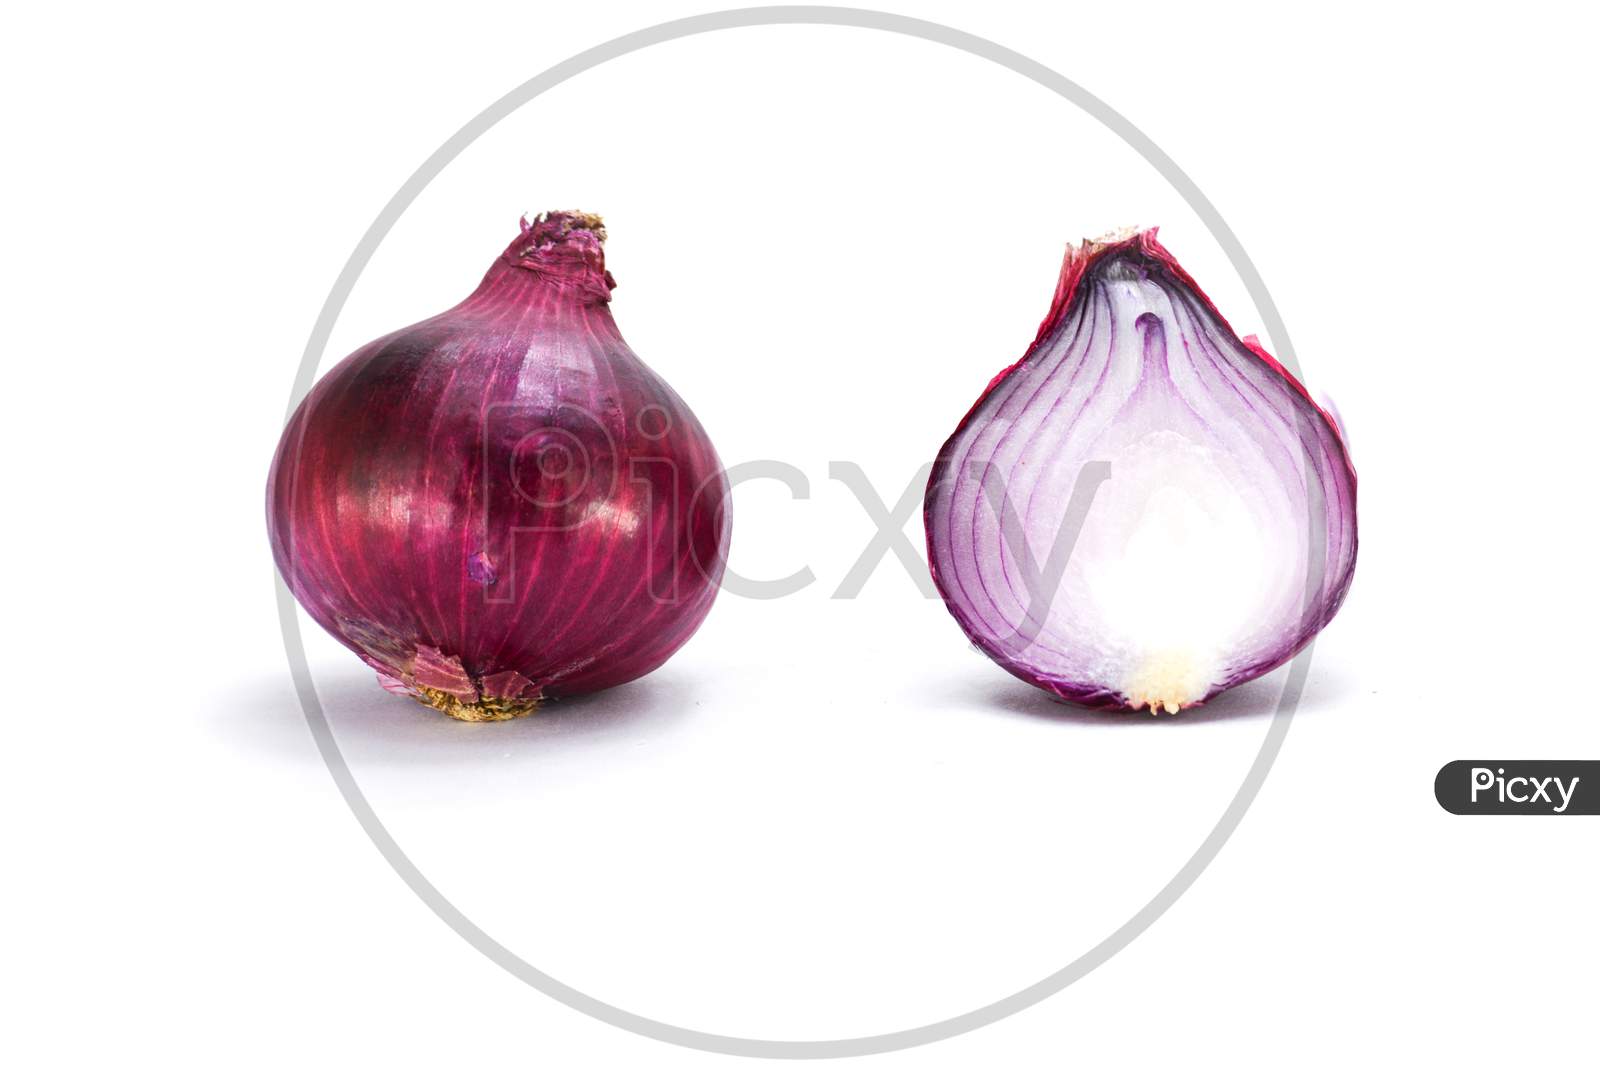 Fresh red onion isolated on white background